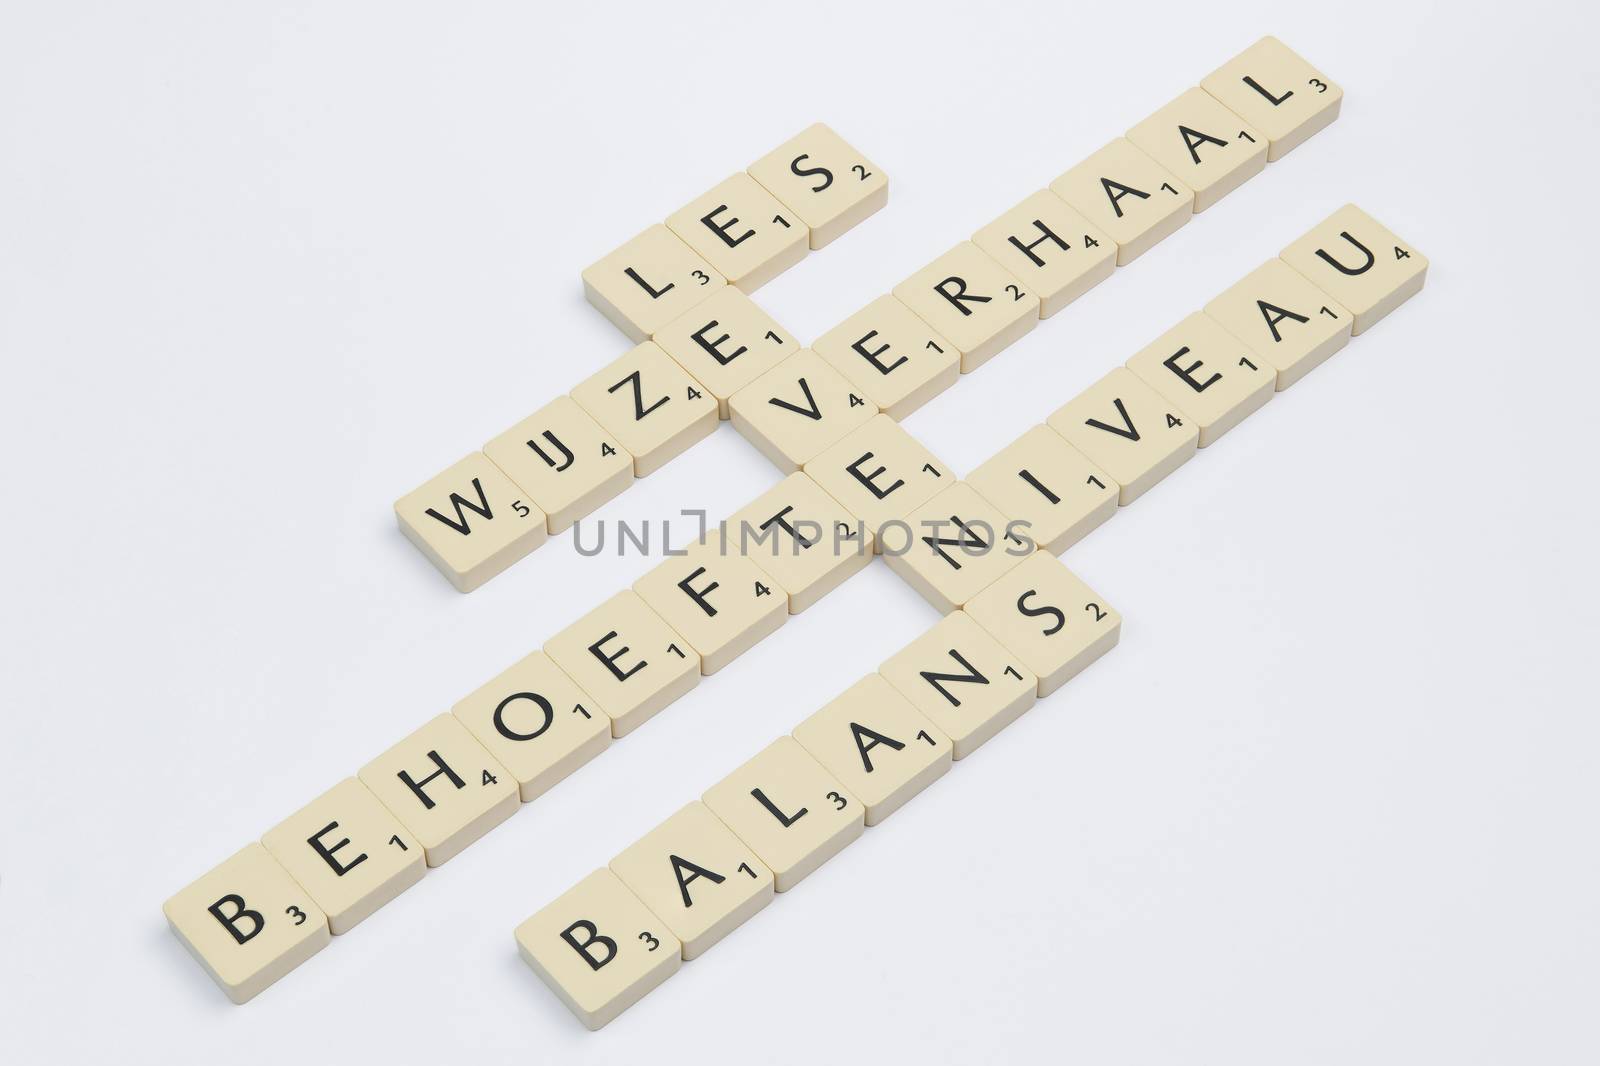 Scrabble words related to the word life in Dutch
 by Tofotografie